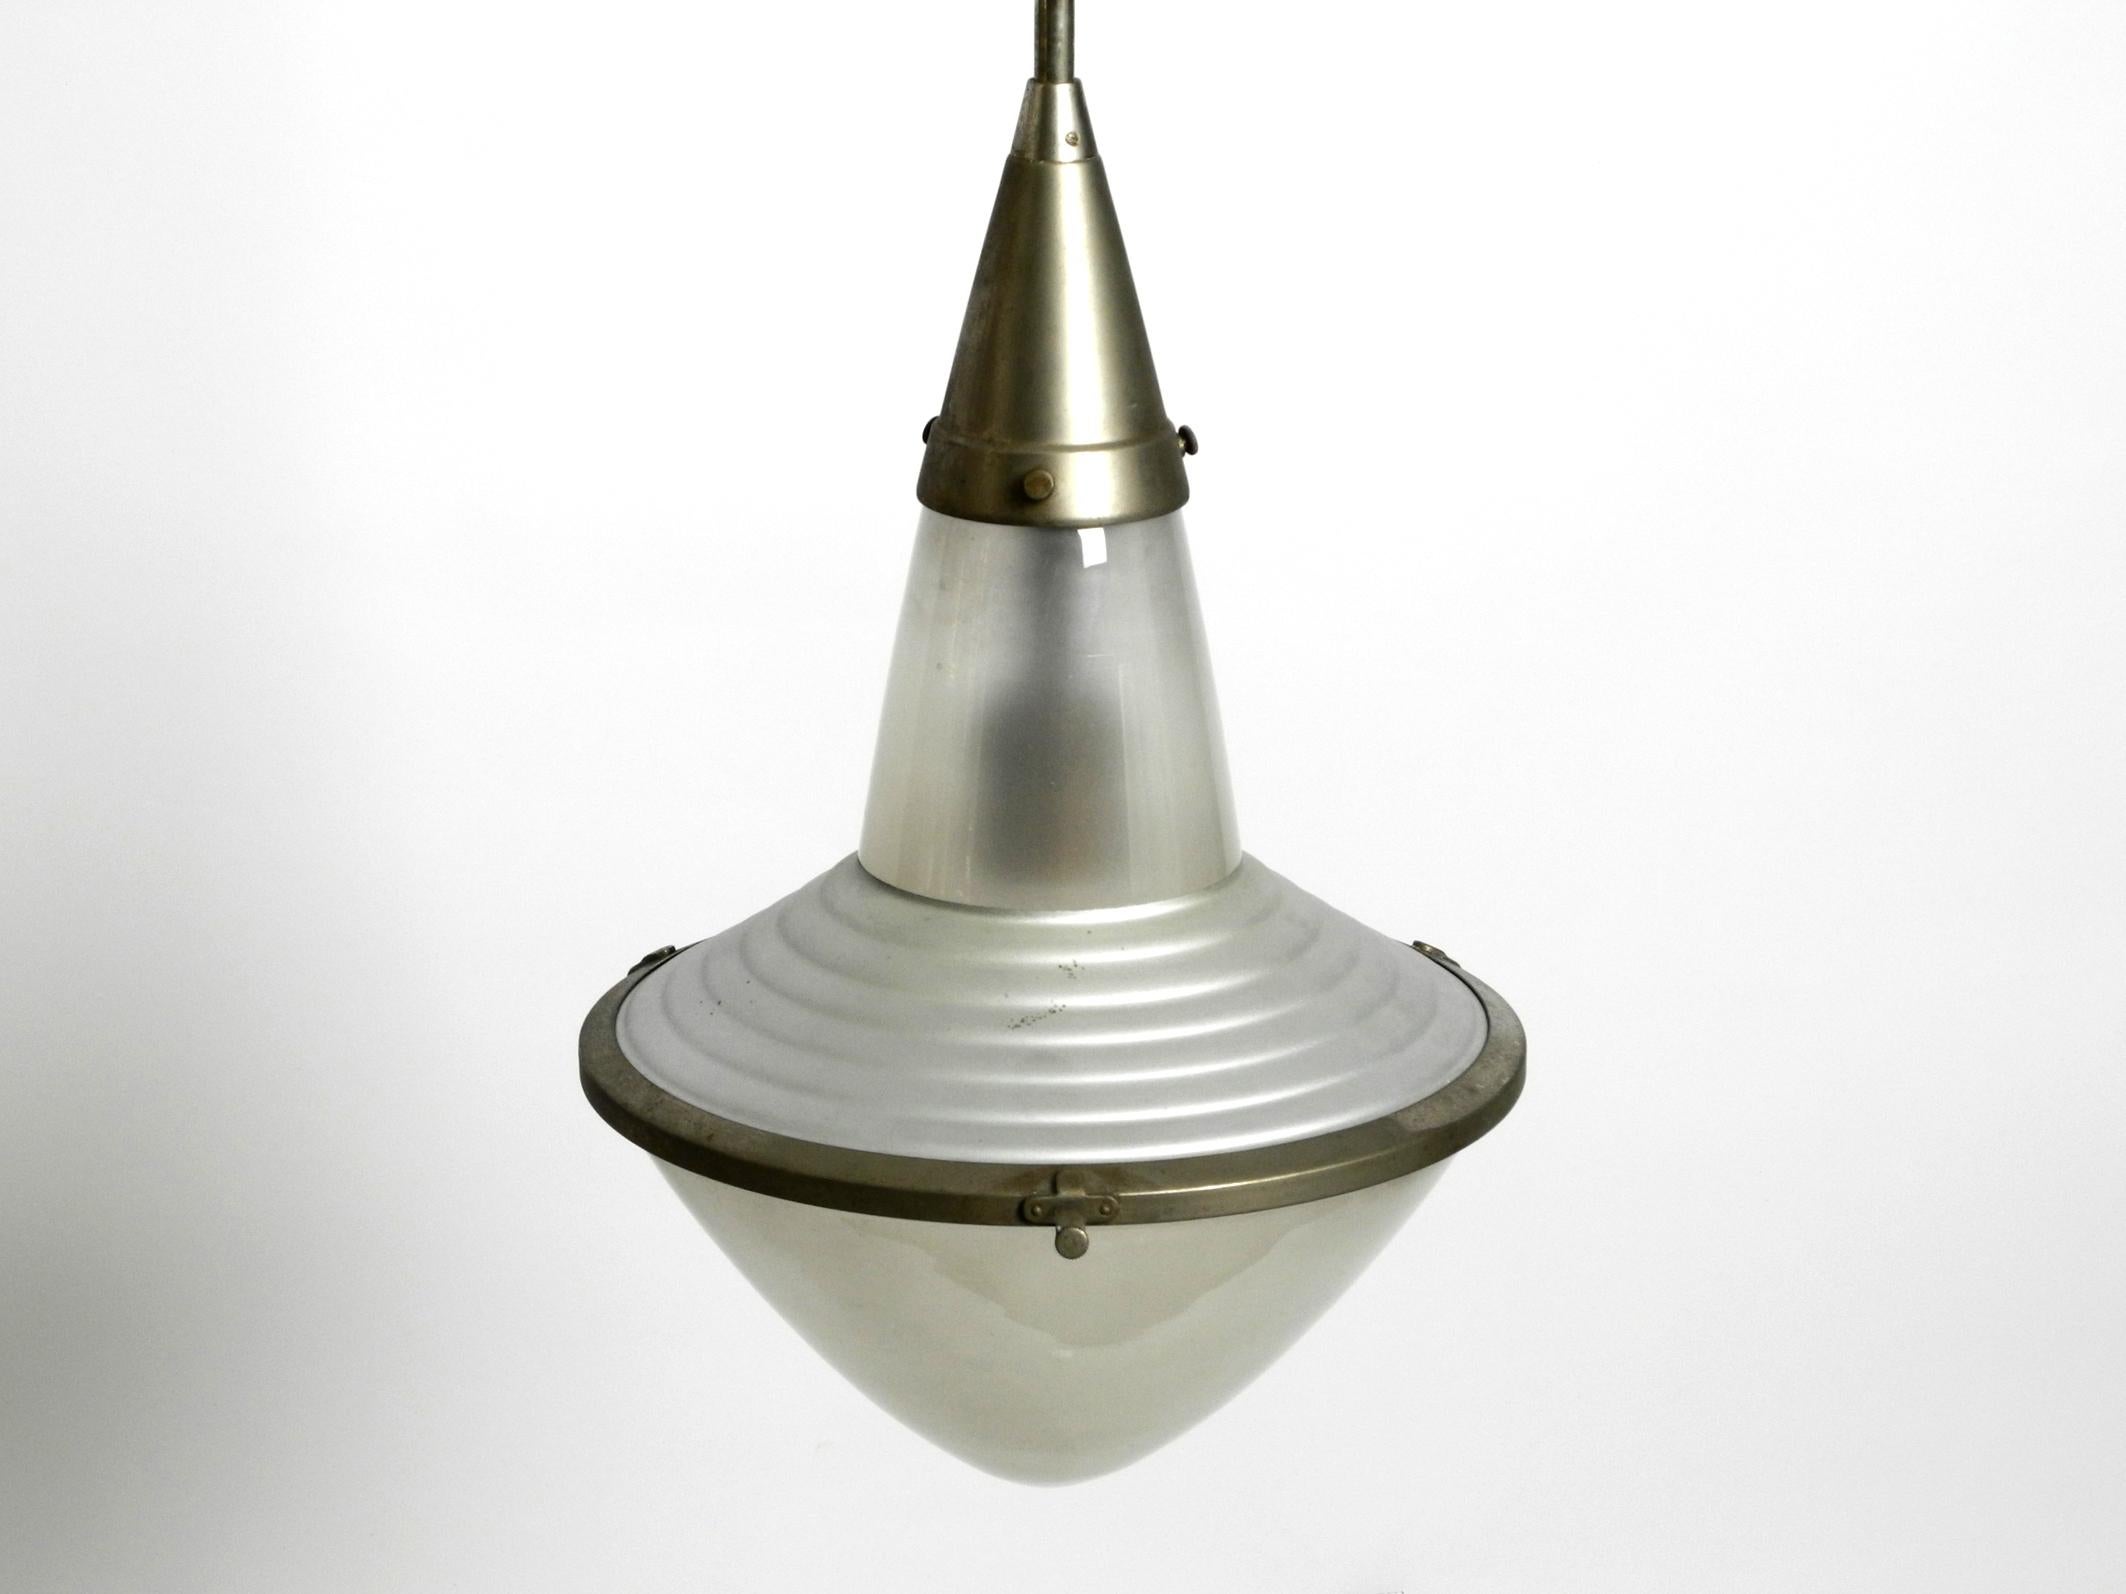 Very rare 1930s pendant lamp by Adolf Meyer for Zeiss Ikon with an adjustable shade.
Great extraordinary industrial design from the 1930s.
Made in Germany. With original label on the upper shade.
Frame and canopy made of nickel-plated metal.
The